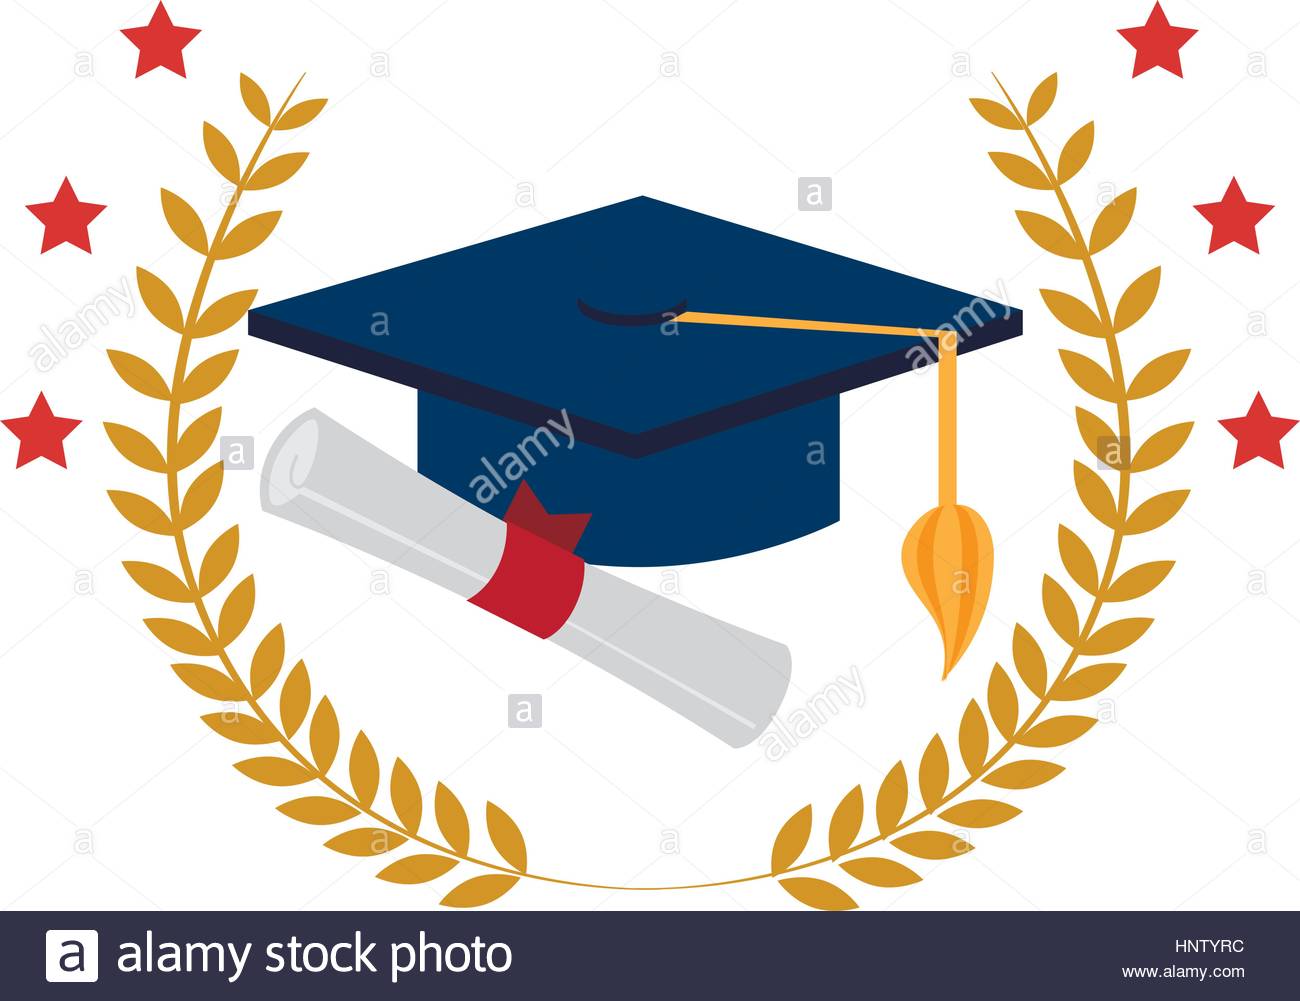 certificate clipart diploma